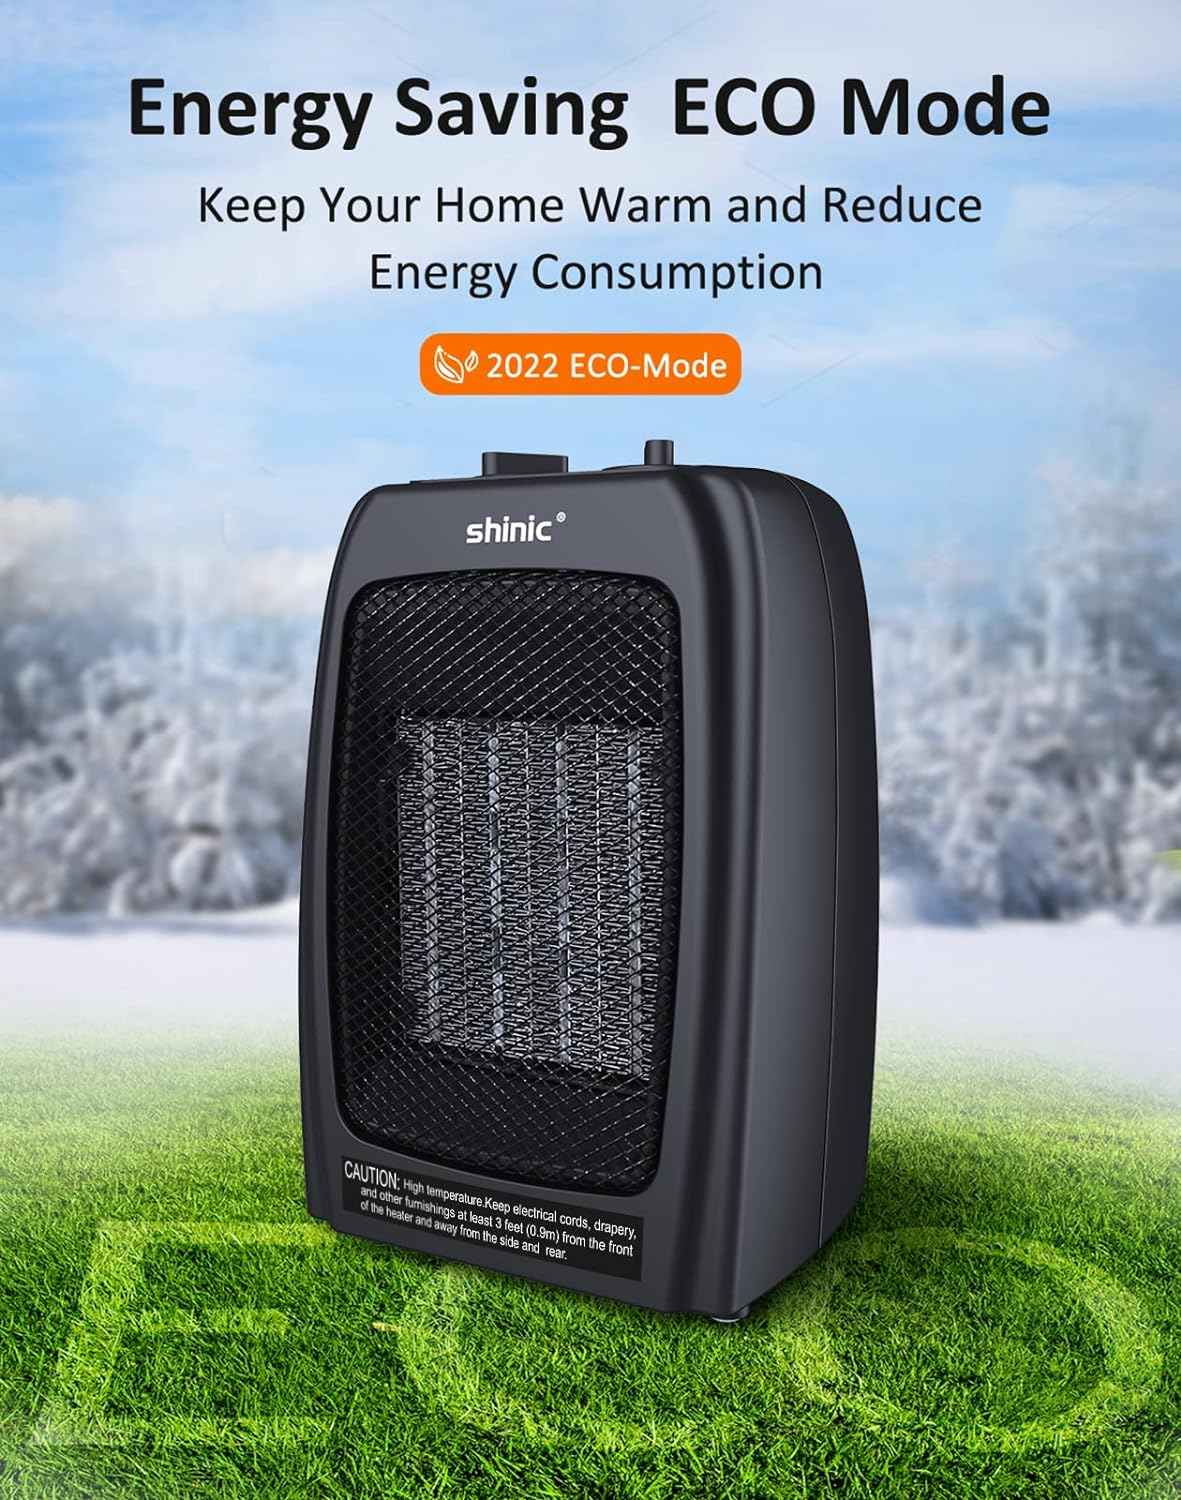 Space Heater for Indoor Use, 1500W Ceramic Space Heater, 1s Fast Heat, Tip-Over and Overheat Protection, Electric Space Heater, Portable, Quiet Office and Small Room Desk Heater, Green